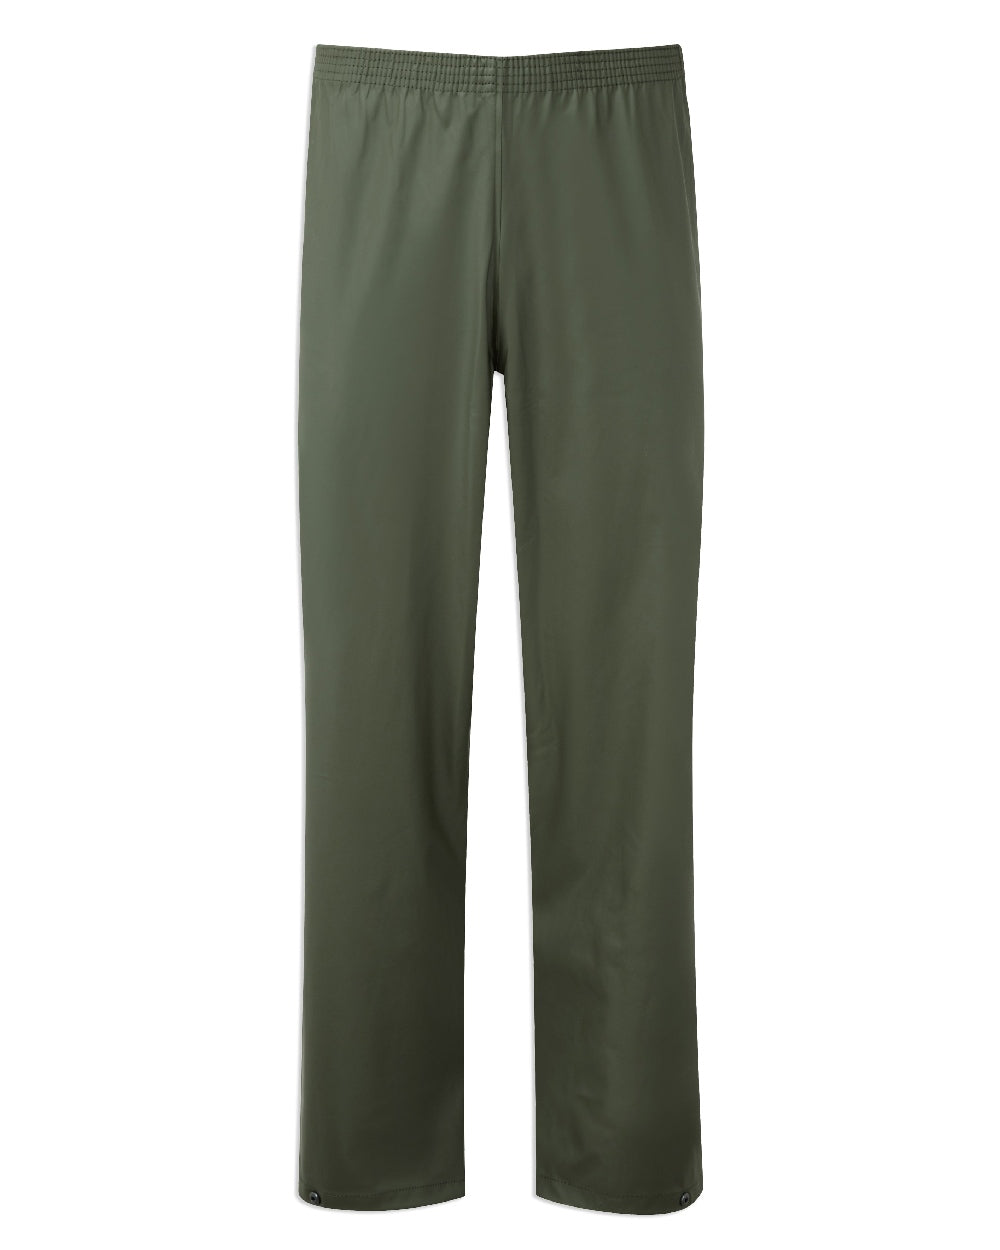 Fort Airflex Waterproof Breathable Trousers in Olive 